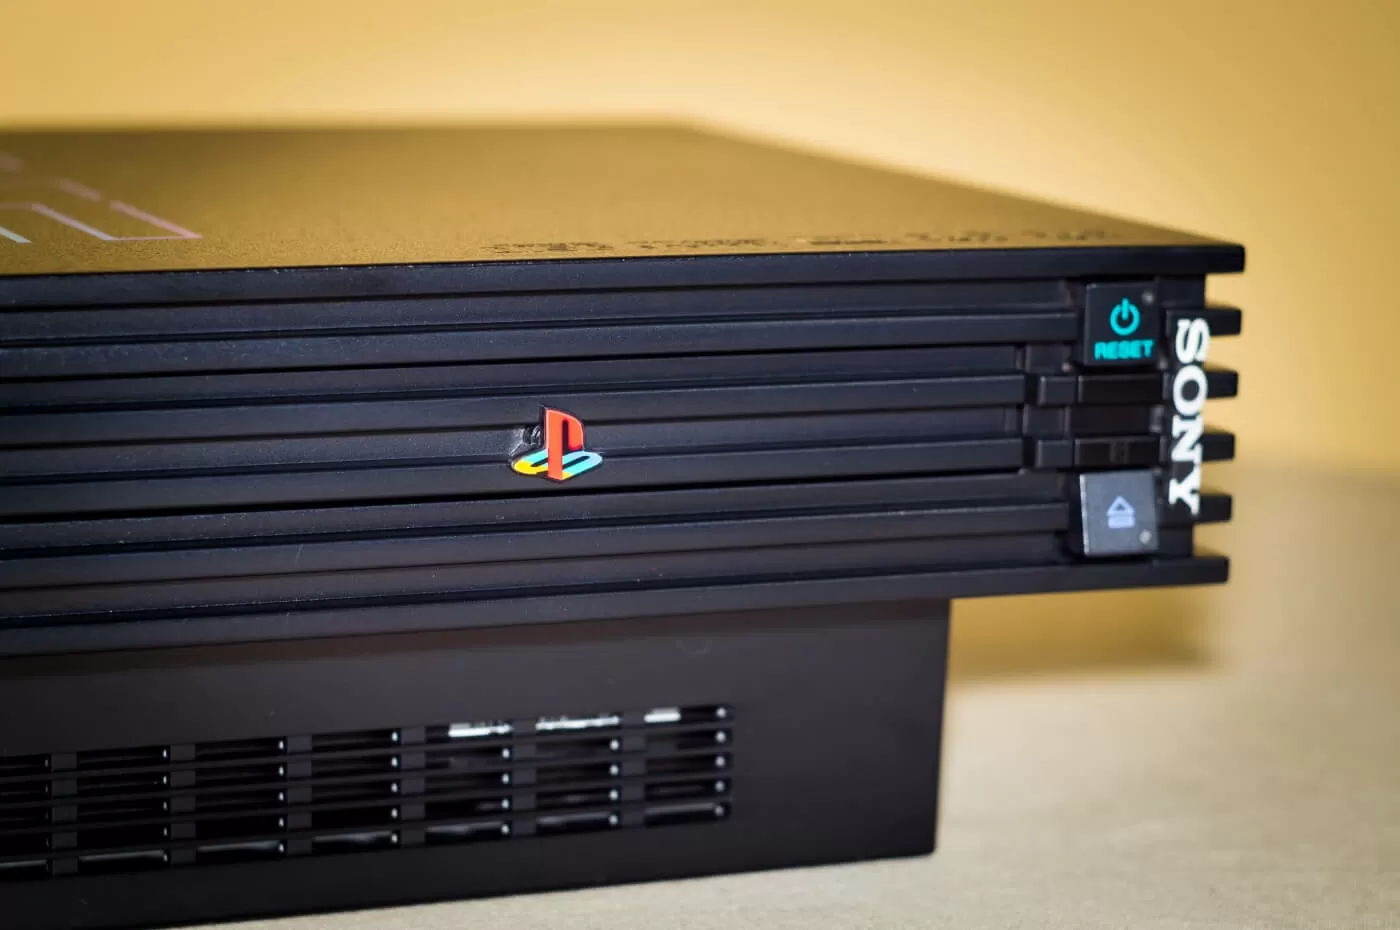 PlayStation 2: Sony launched the world's best-selling game console 20 years ago today